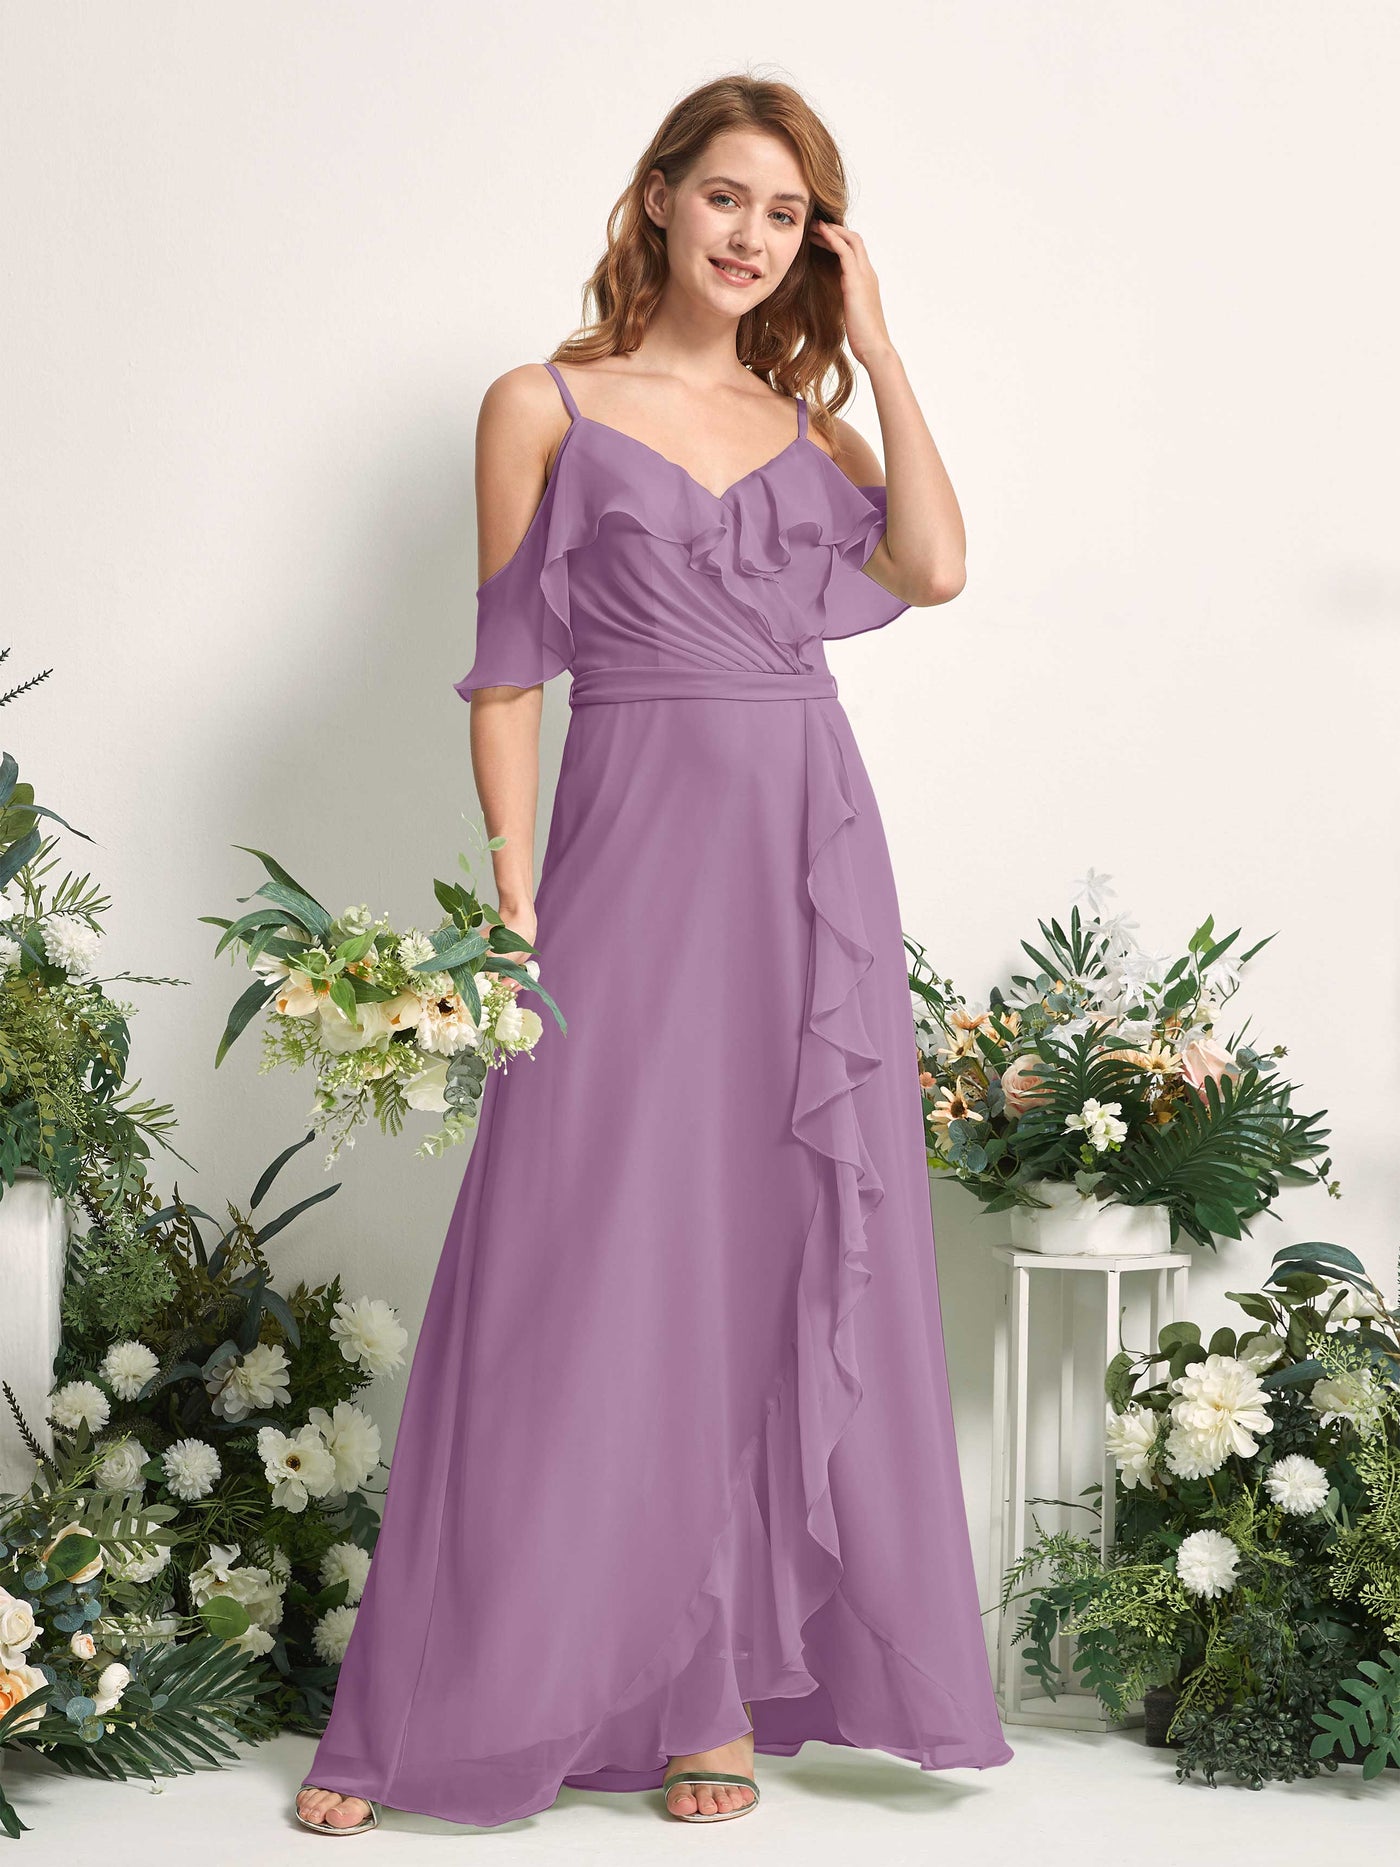 Bridesmaid Dress A-line Chiffon Spaghetti-straps Full Length Sleeveless Wedding Party Dress - Orchid Mist (81227421)#color_orchid-mist